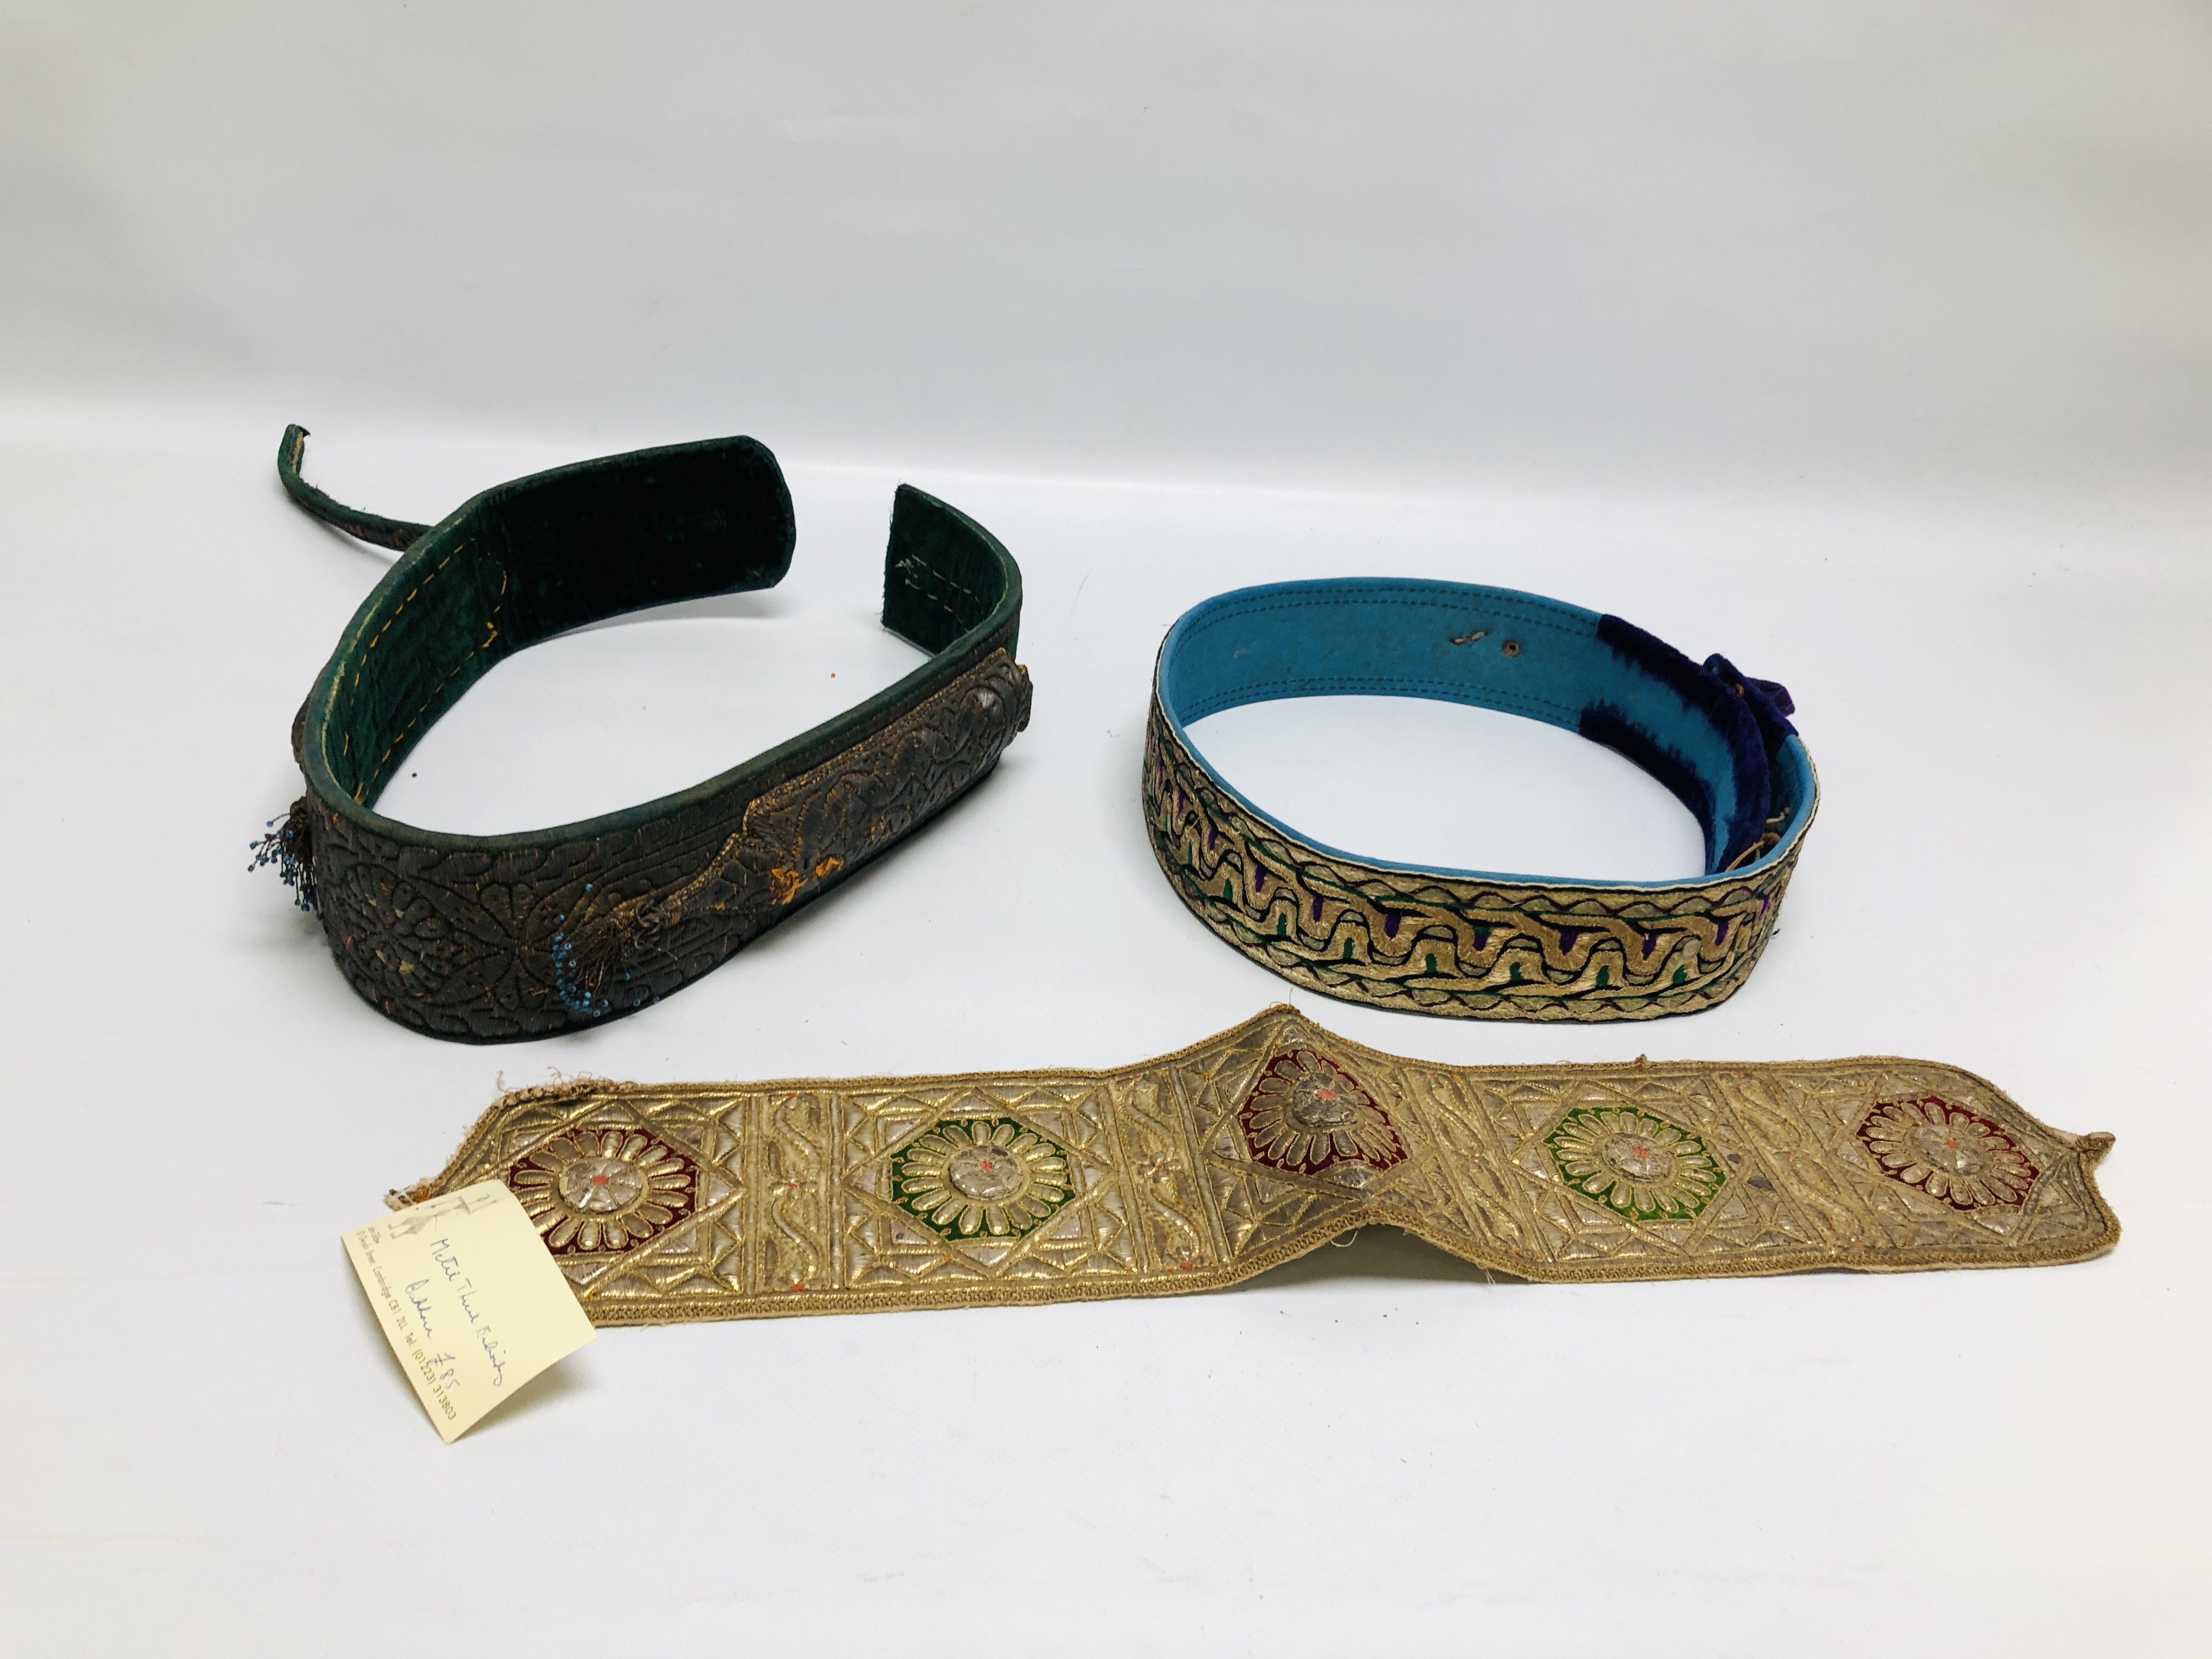 TWO MIDDLE EASTERN WOVEN BELTS ALONG WITH A VINTAGE METAL WORK THREADED PANEL